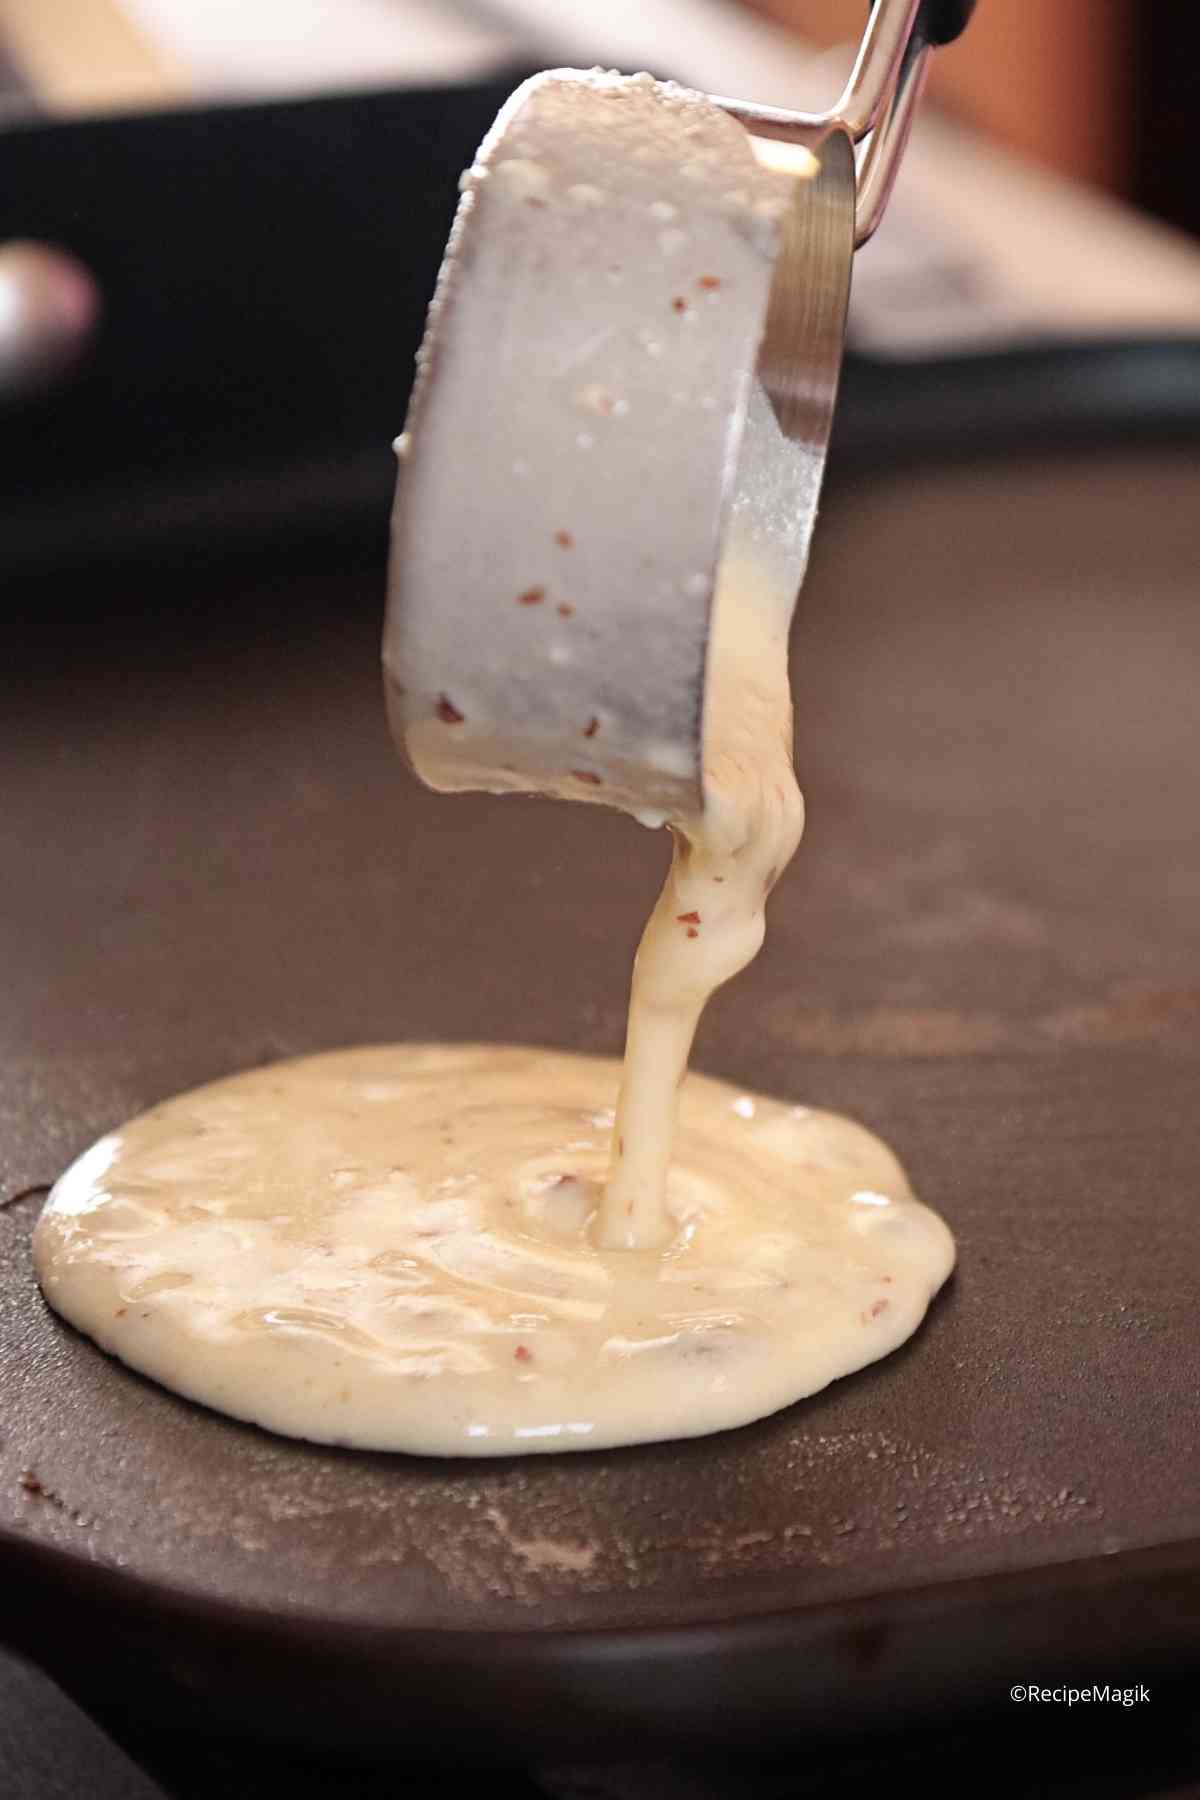 pouring pancake batter into a griddle